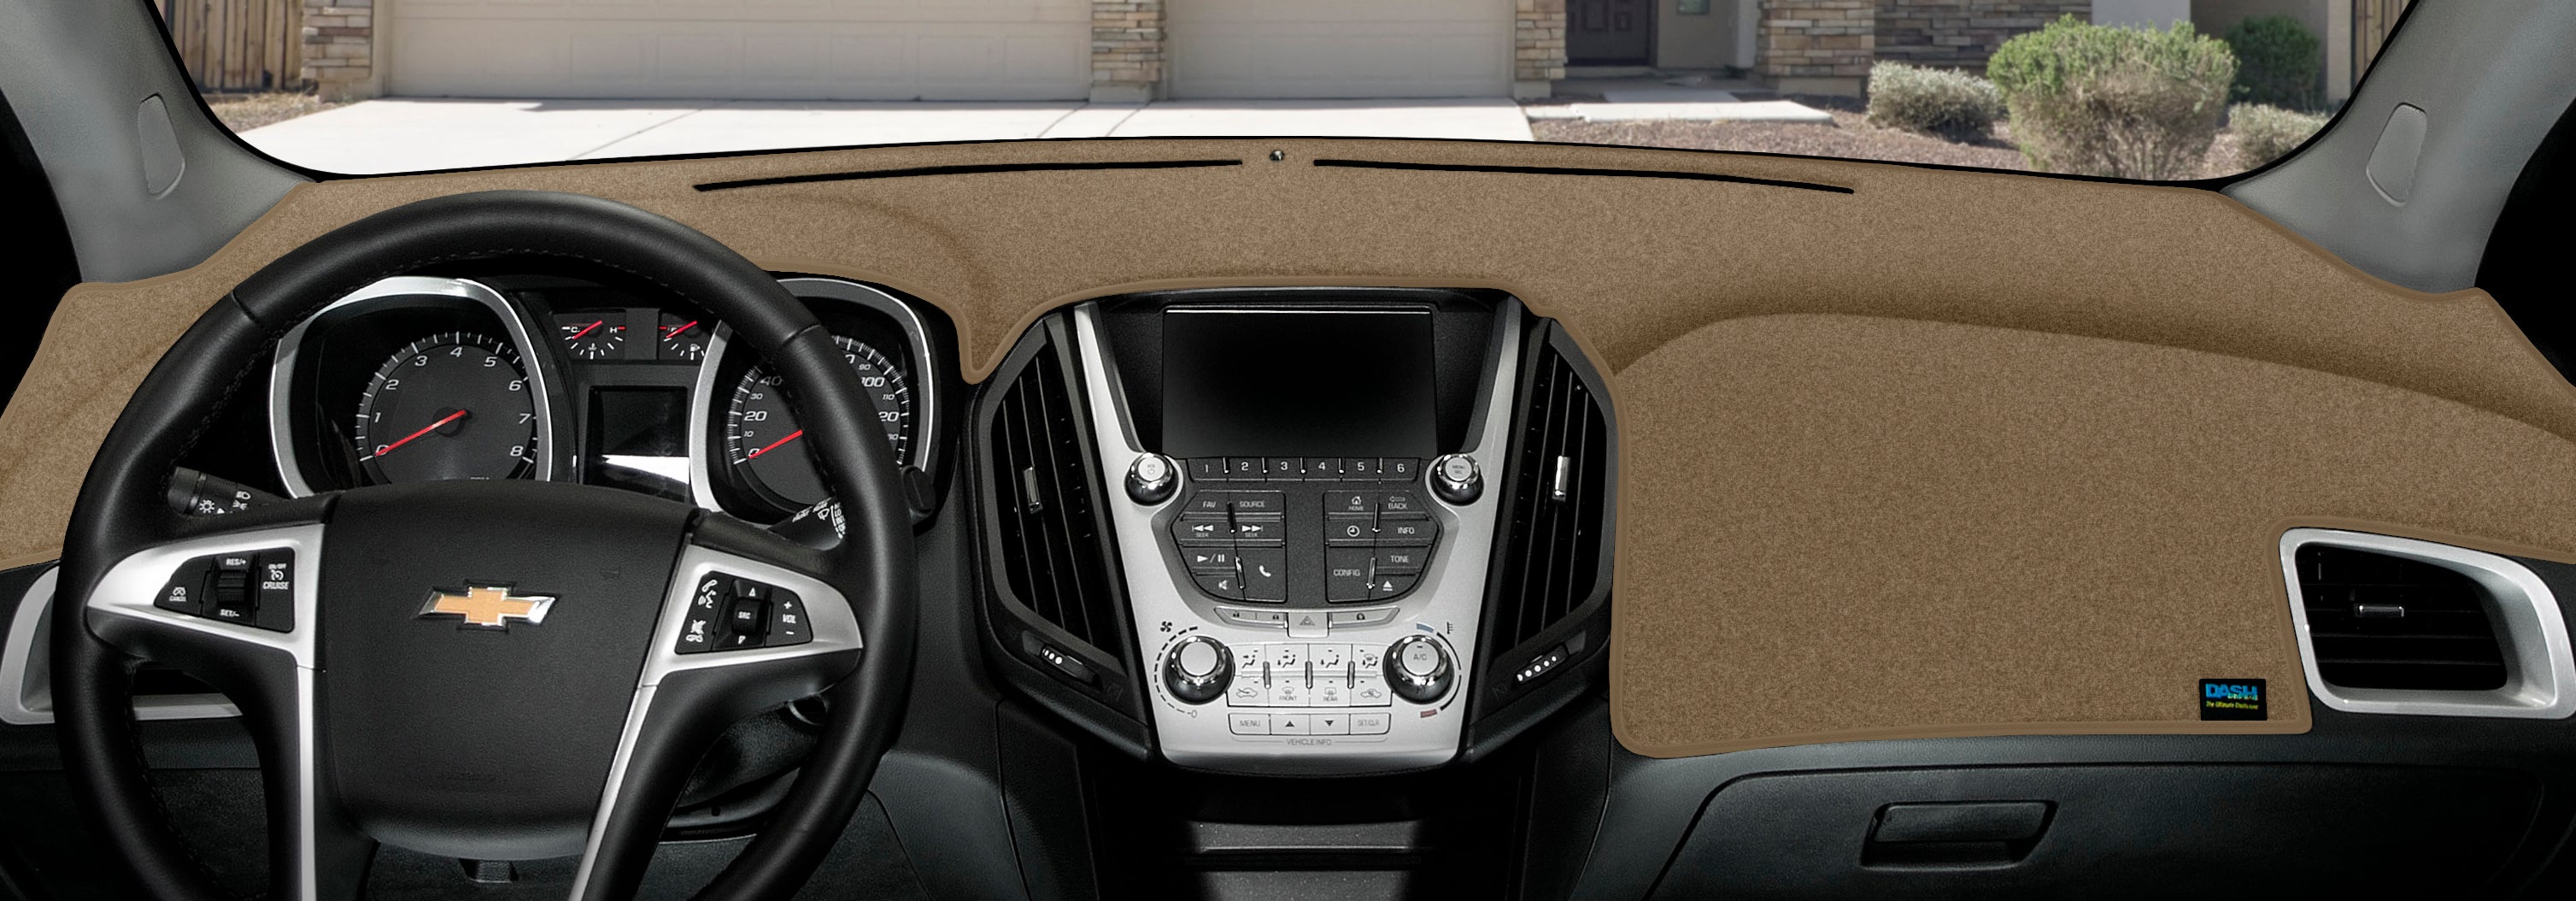 Enhance Your Dashboard with Custom-Fit Dash Covers for Optimal Style and Protection